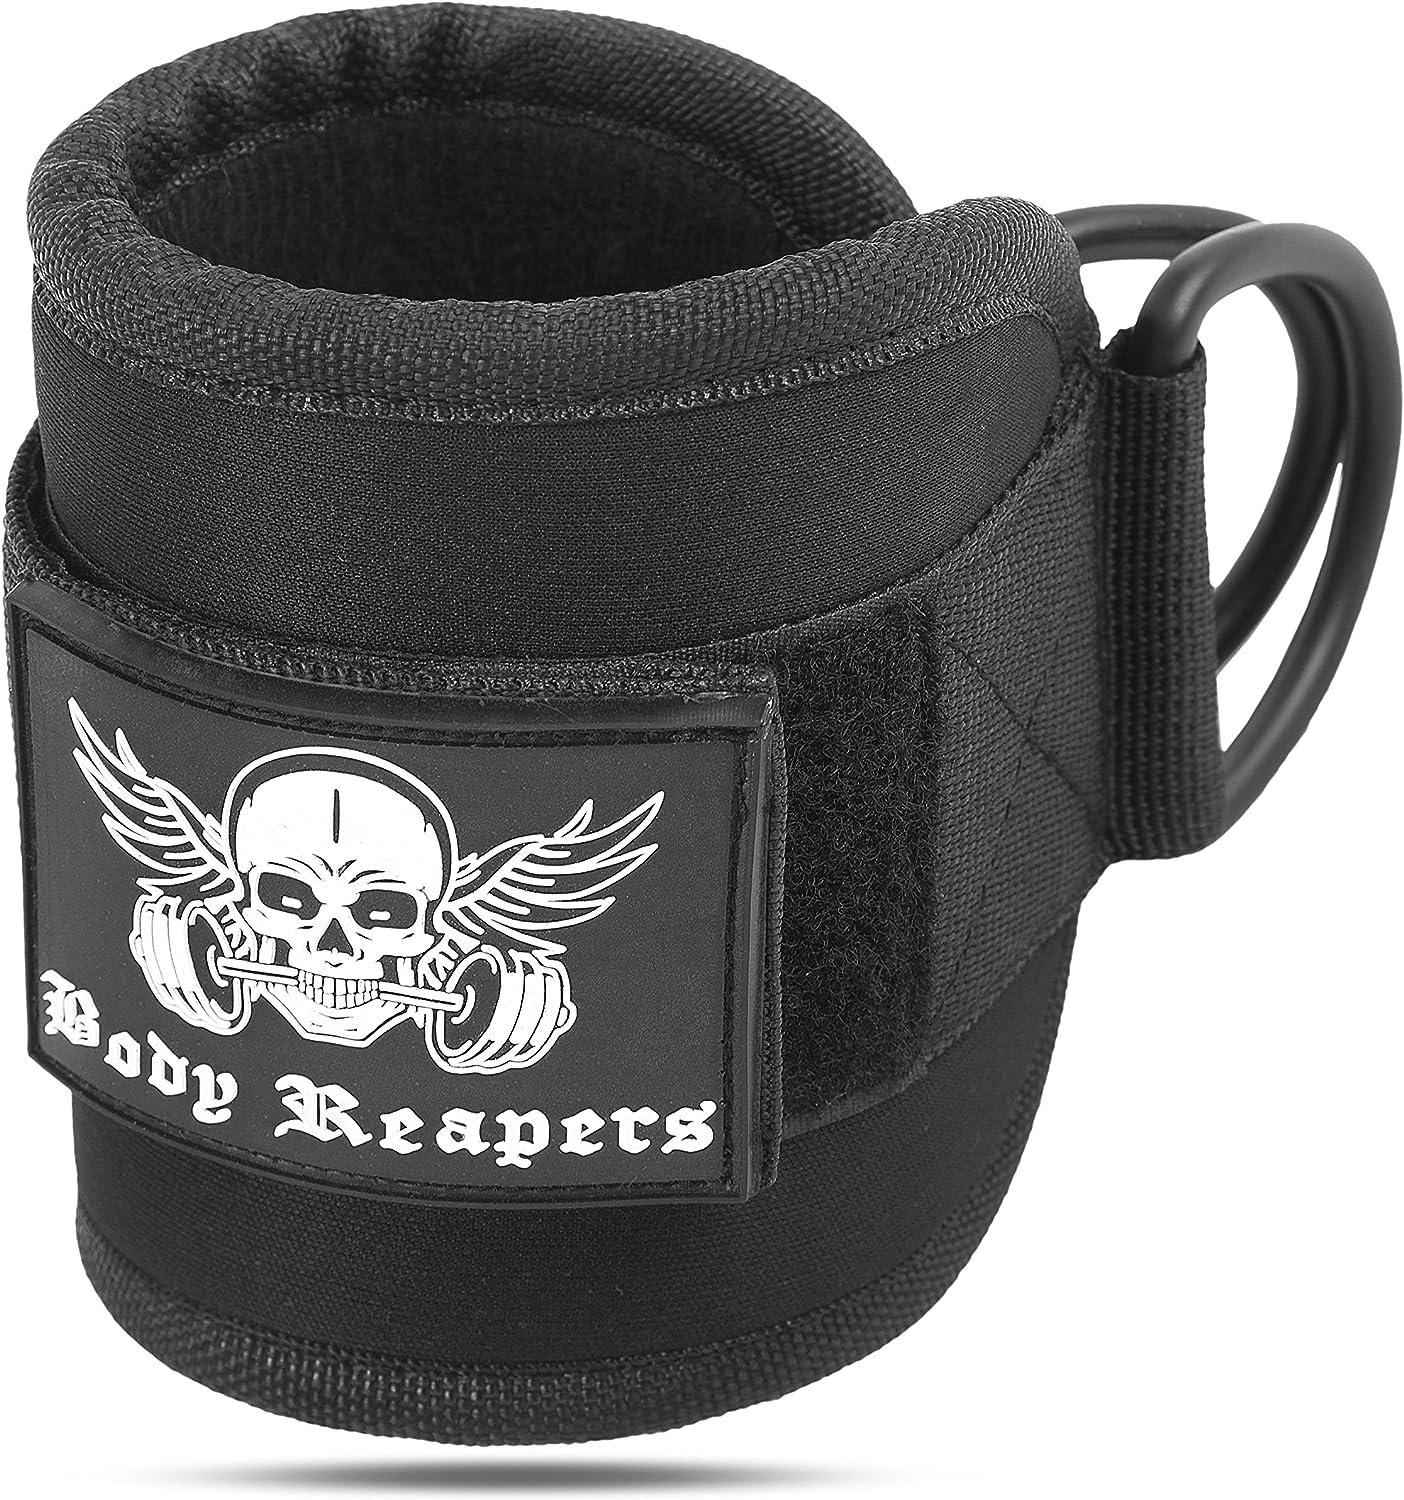 Weight Lifting Straps  Fitness Equipment - Body Reapers